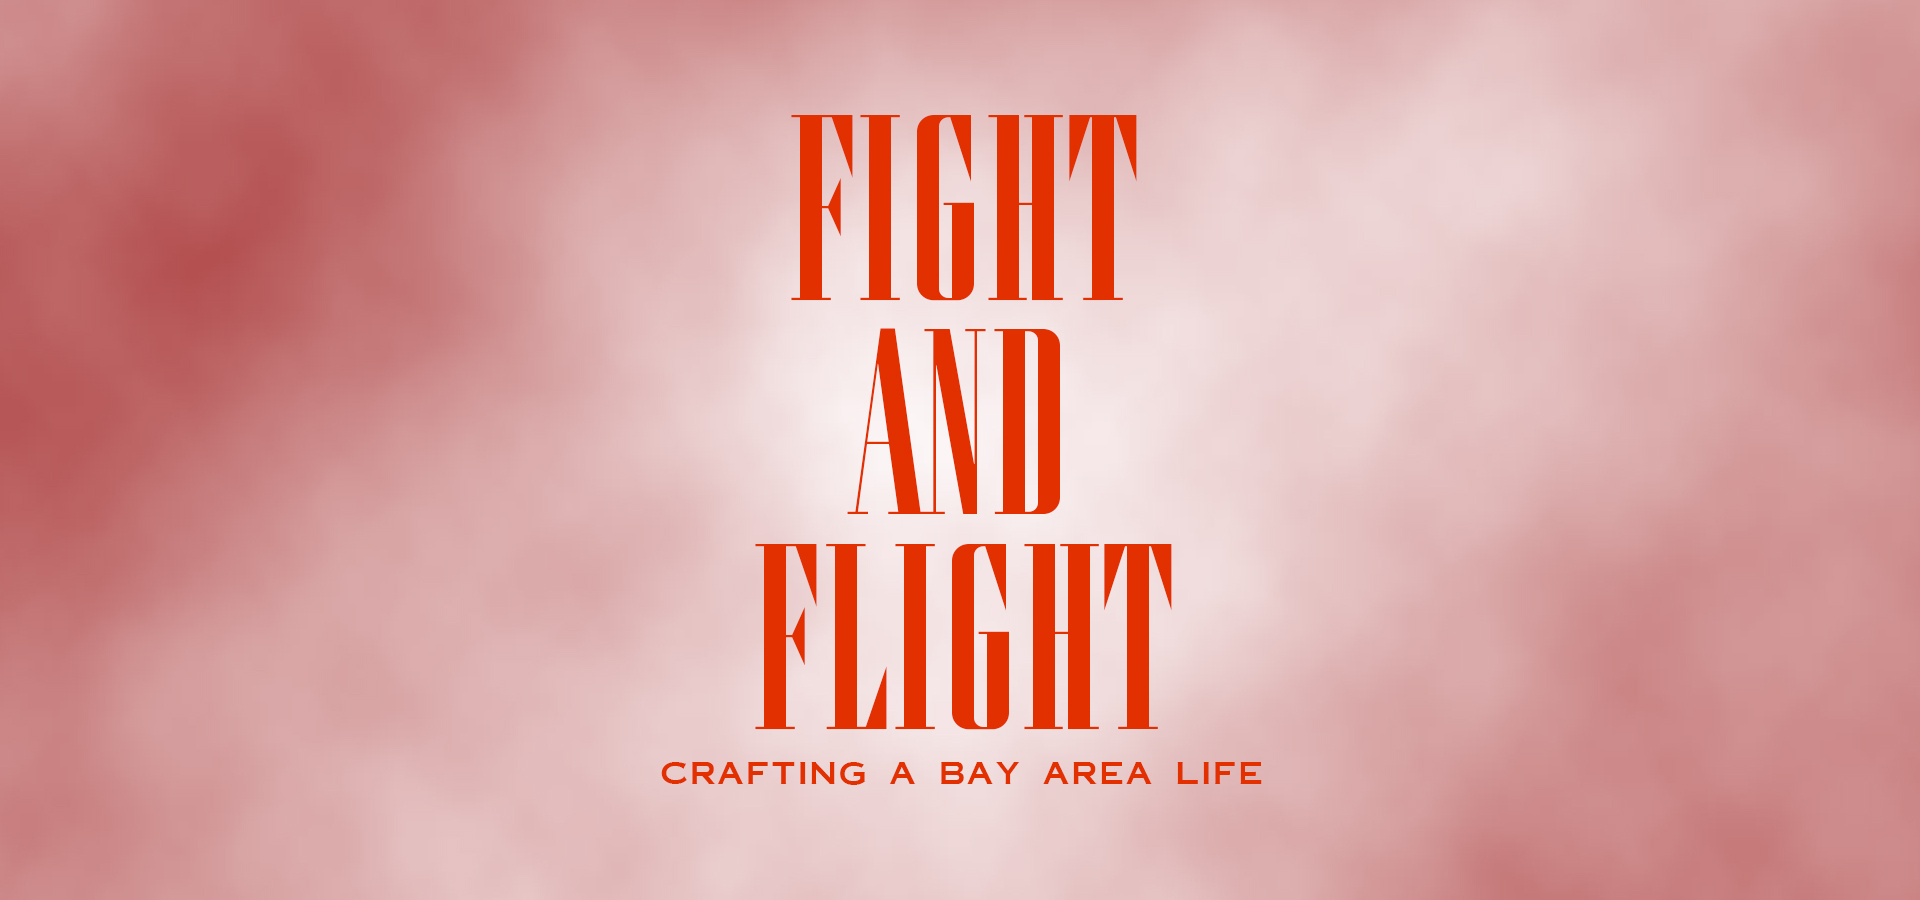 Text reading: Fight and Flight Crafting a Bay Area Life on a red cloud like background